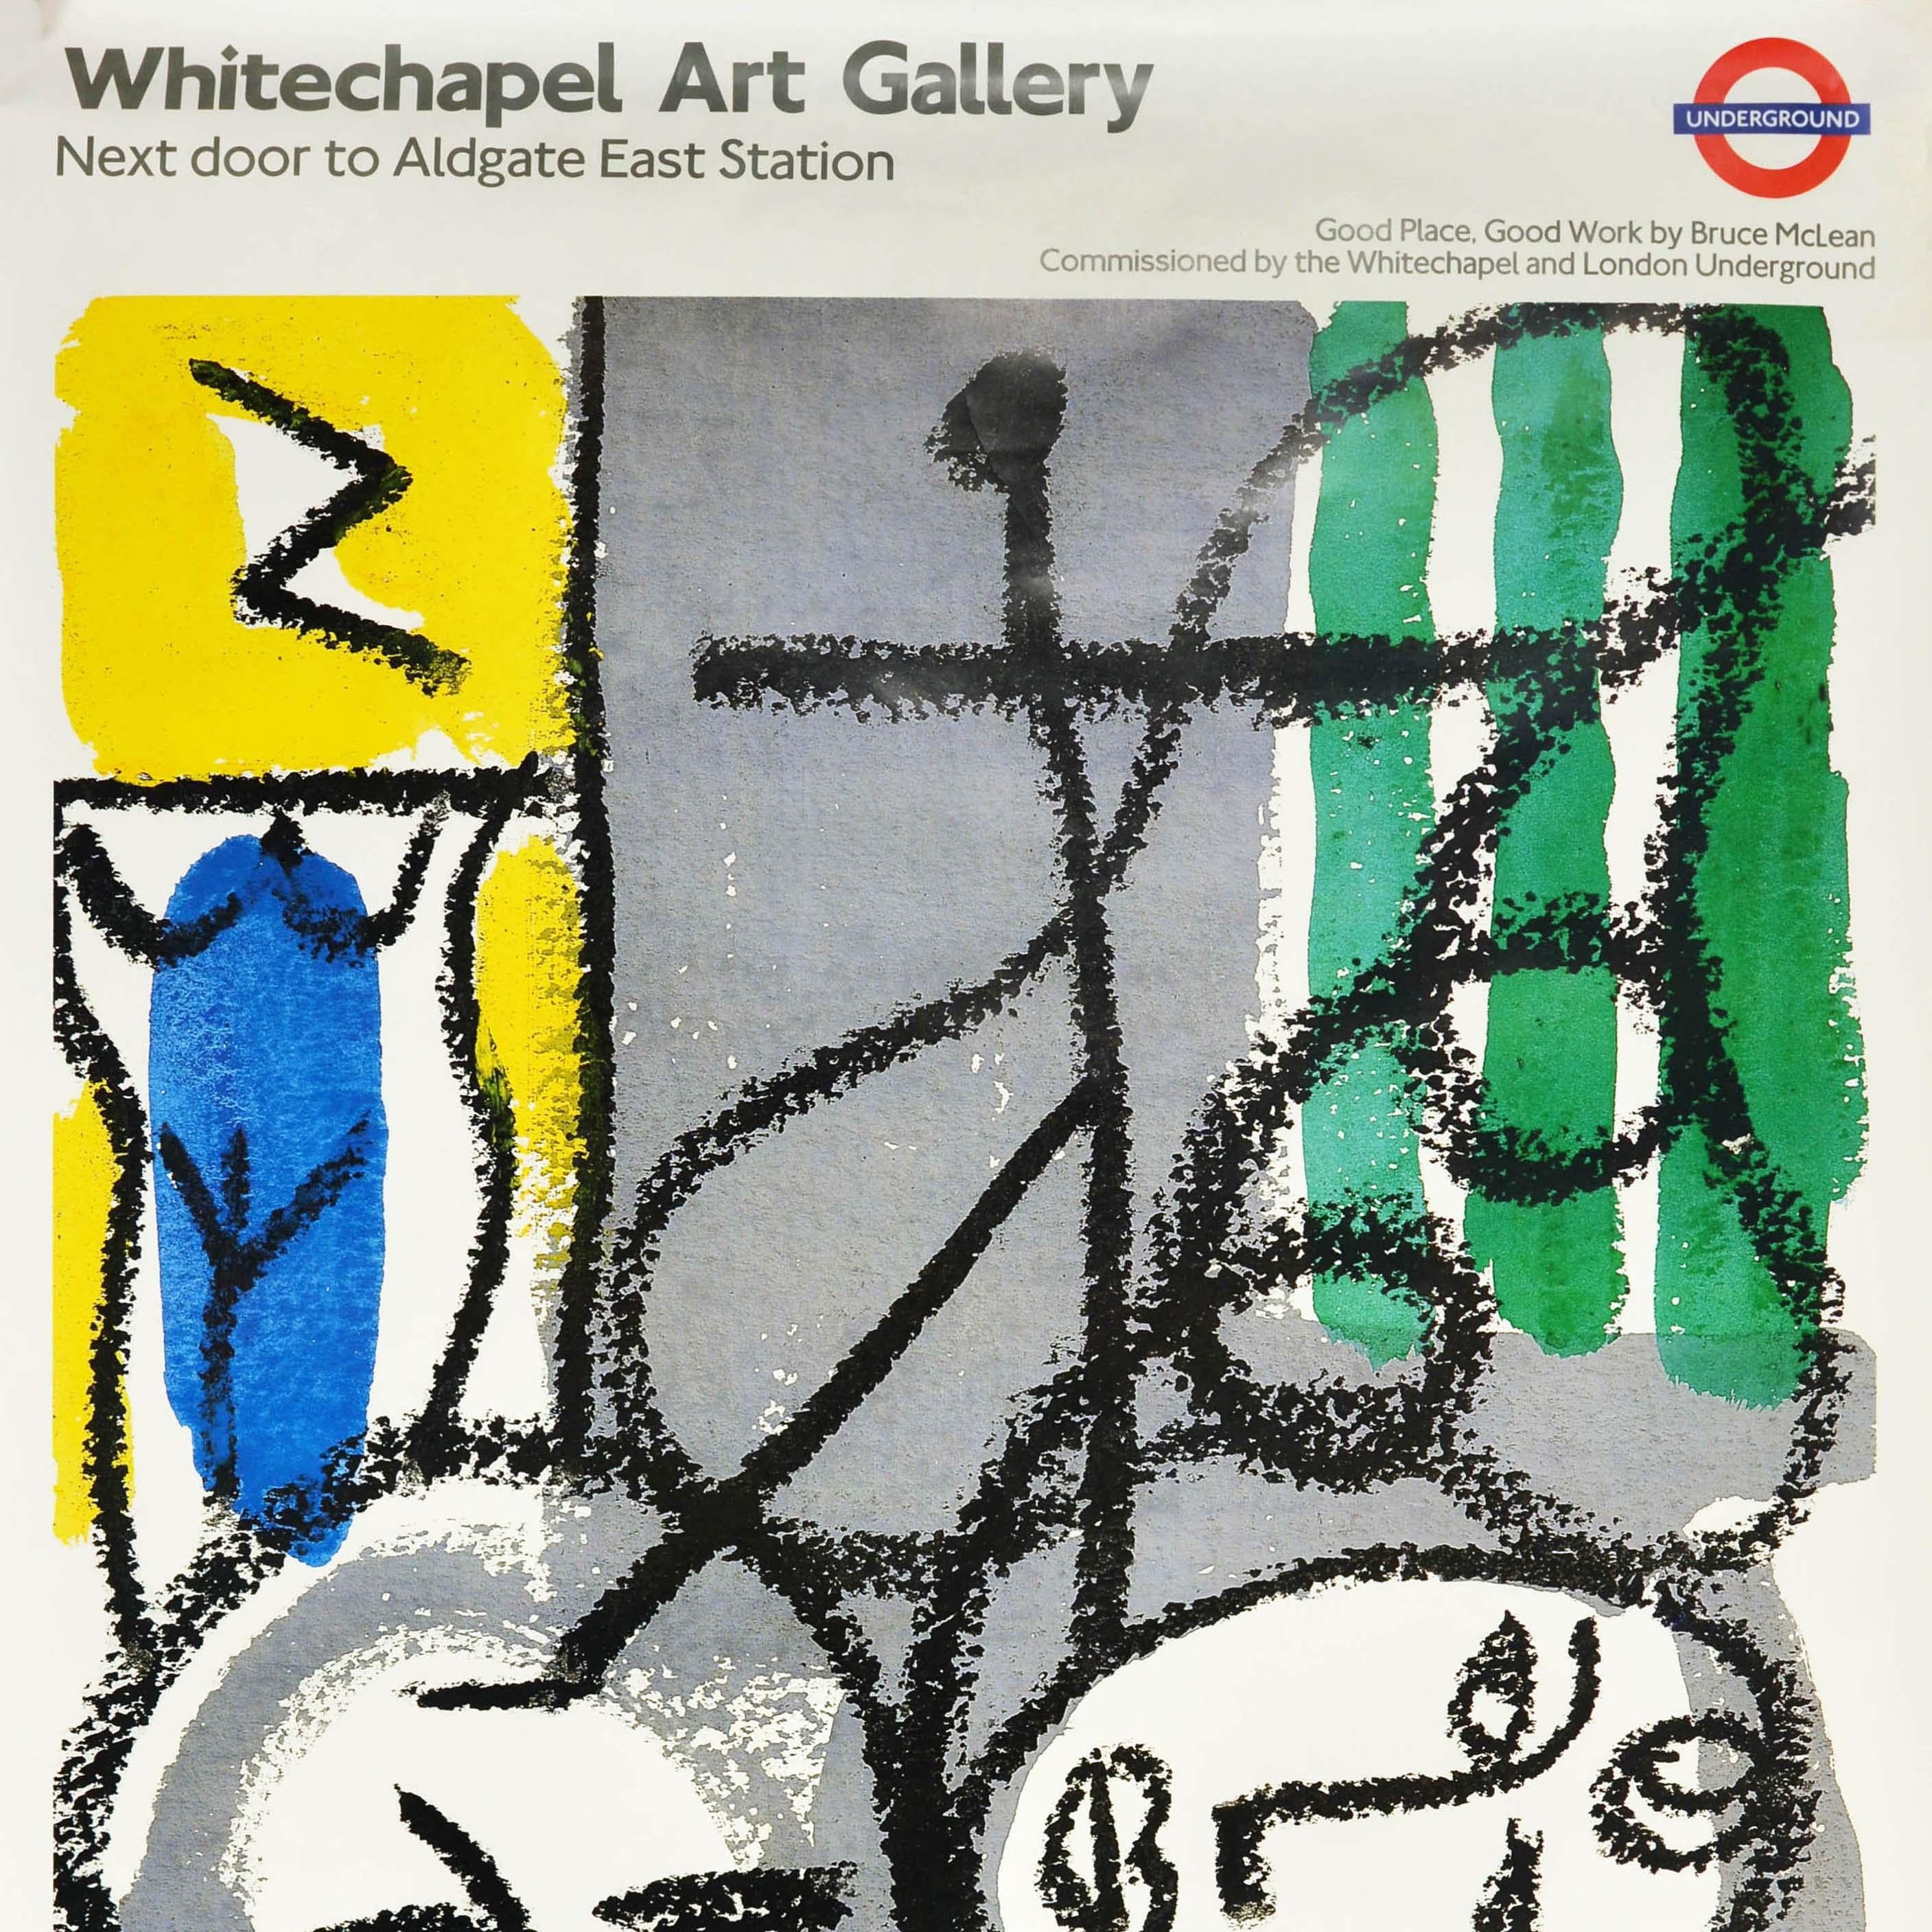 Original vintage London Underground poster - Whitechapel Art Gallery next door to Aldgate East station - featuring an abstract design by the Scottish sculptor and painter Bruce McLean (b 1944) depicting faces, one smoking a pipe and the other face